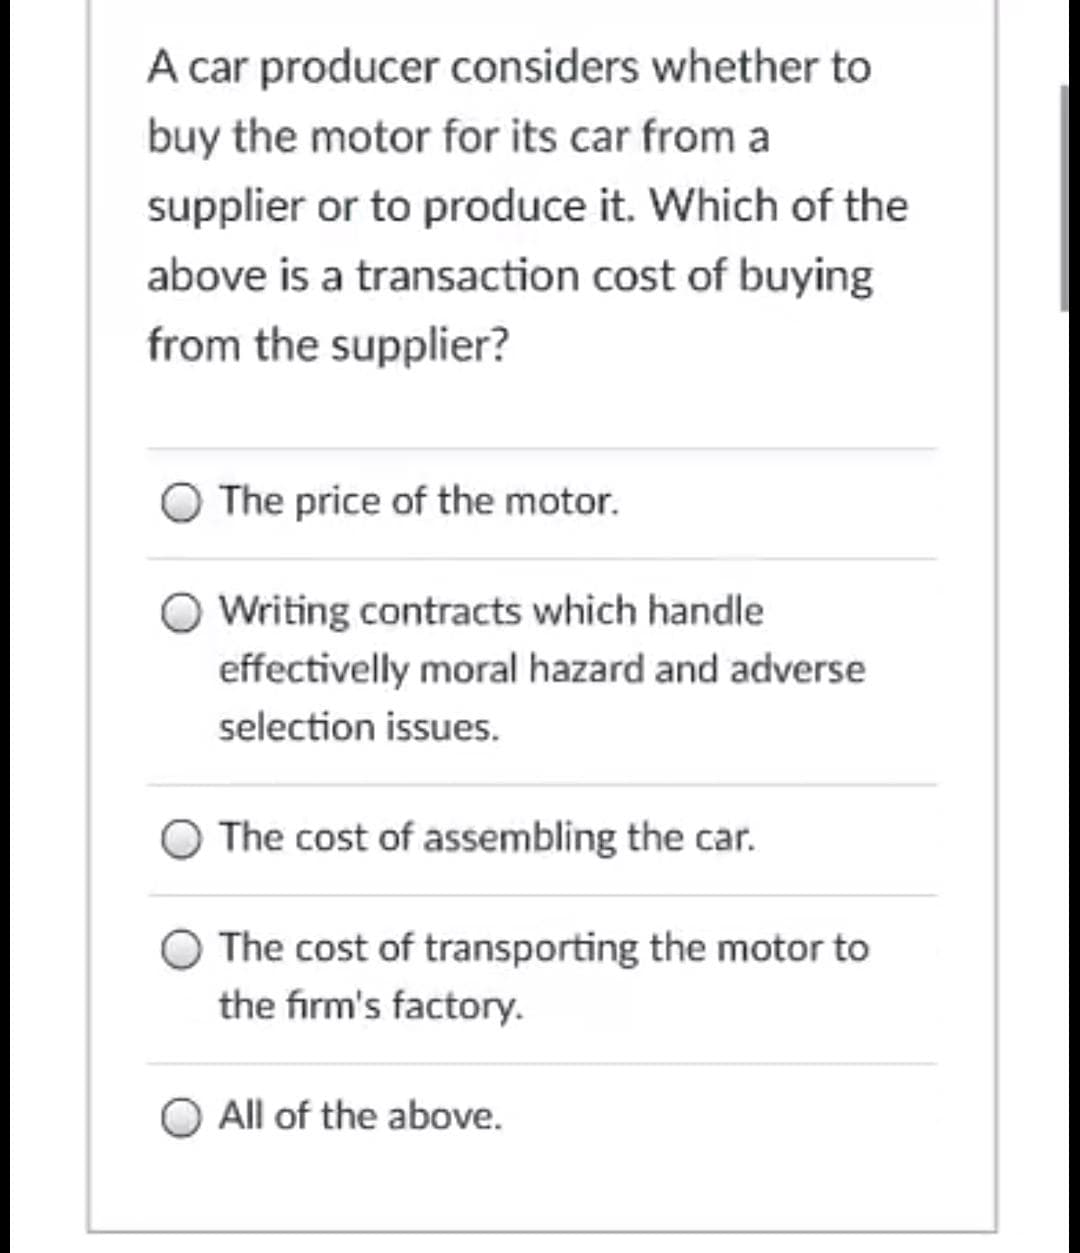 A car producer considers whether to
buy the motor for its car from a
supplier or to produce it. Which of the
above is a transaction cost of buying
from the supplier?
The price of the motor.
O Writing contracts which handle
effectivelly moral hazard and adverse
selection issues.
O The cost of assembling the car.
The cost of transporting the motor to
the firm's factory.
All of the above.
